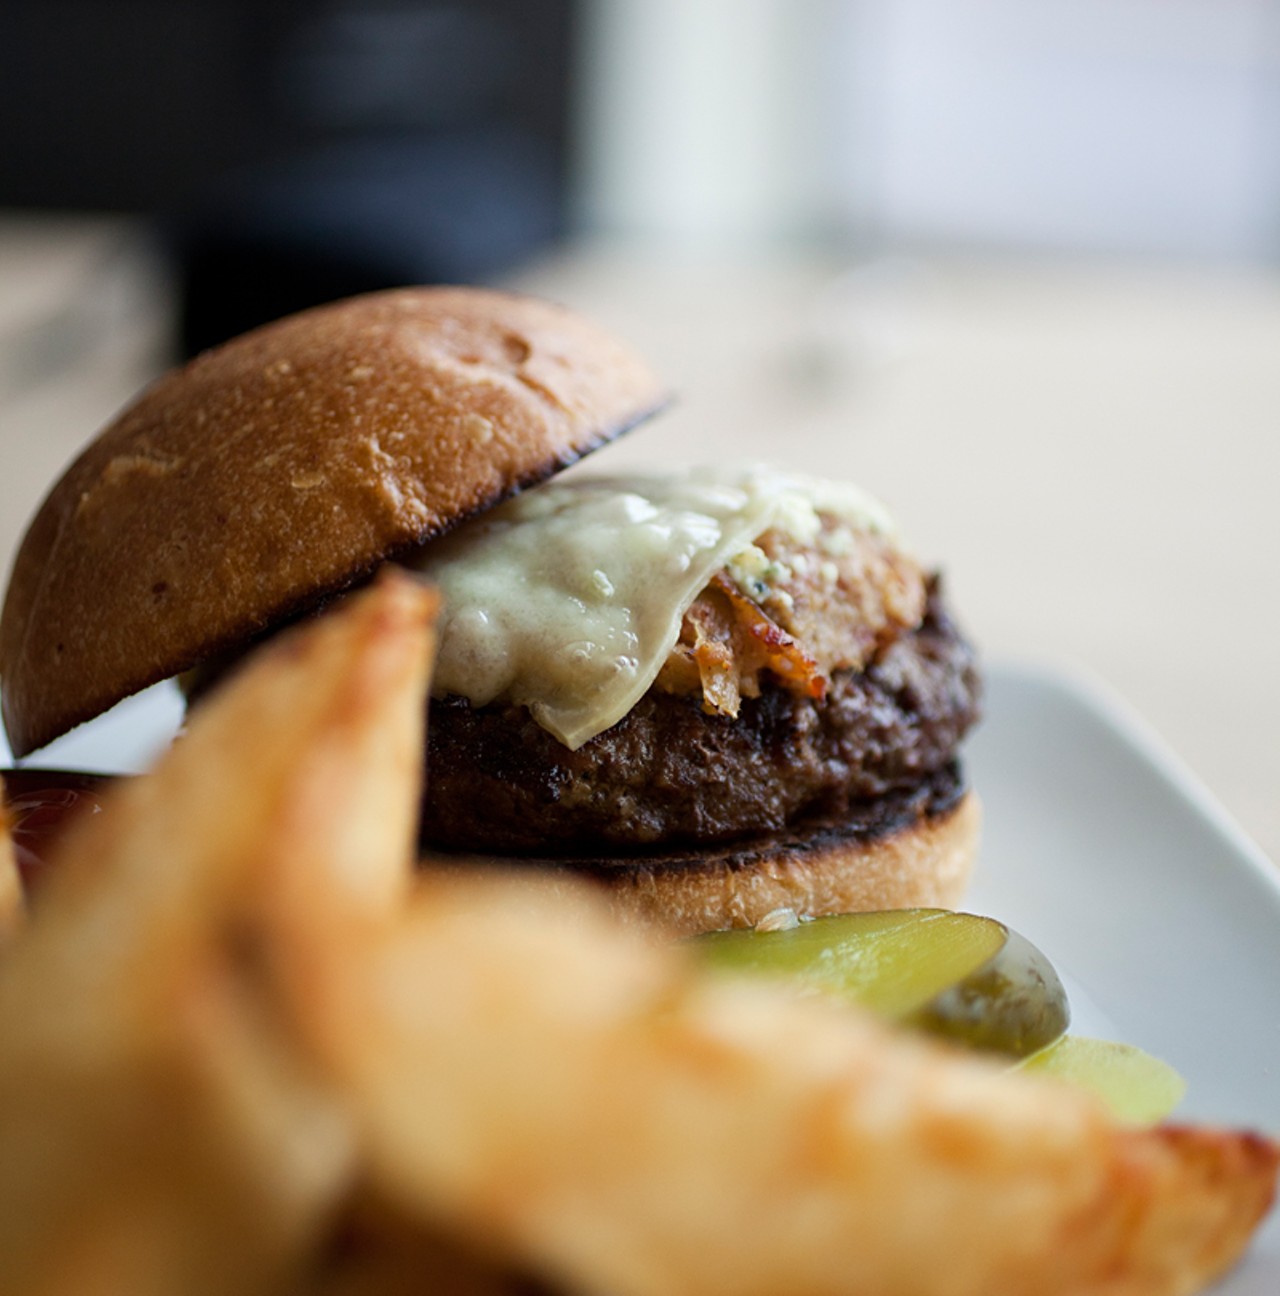 The burger: eight ounces of Angus beef, gruyere and bleu cheeses, and onion and bacon compote on a brioche bun.